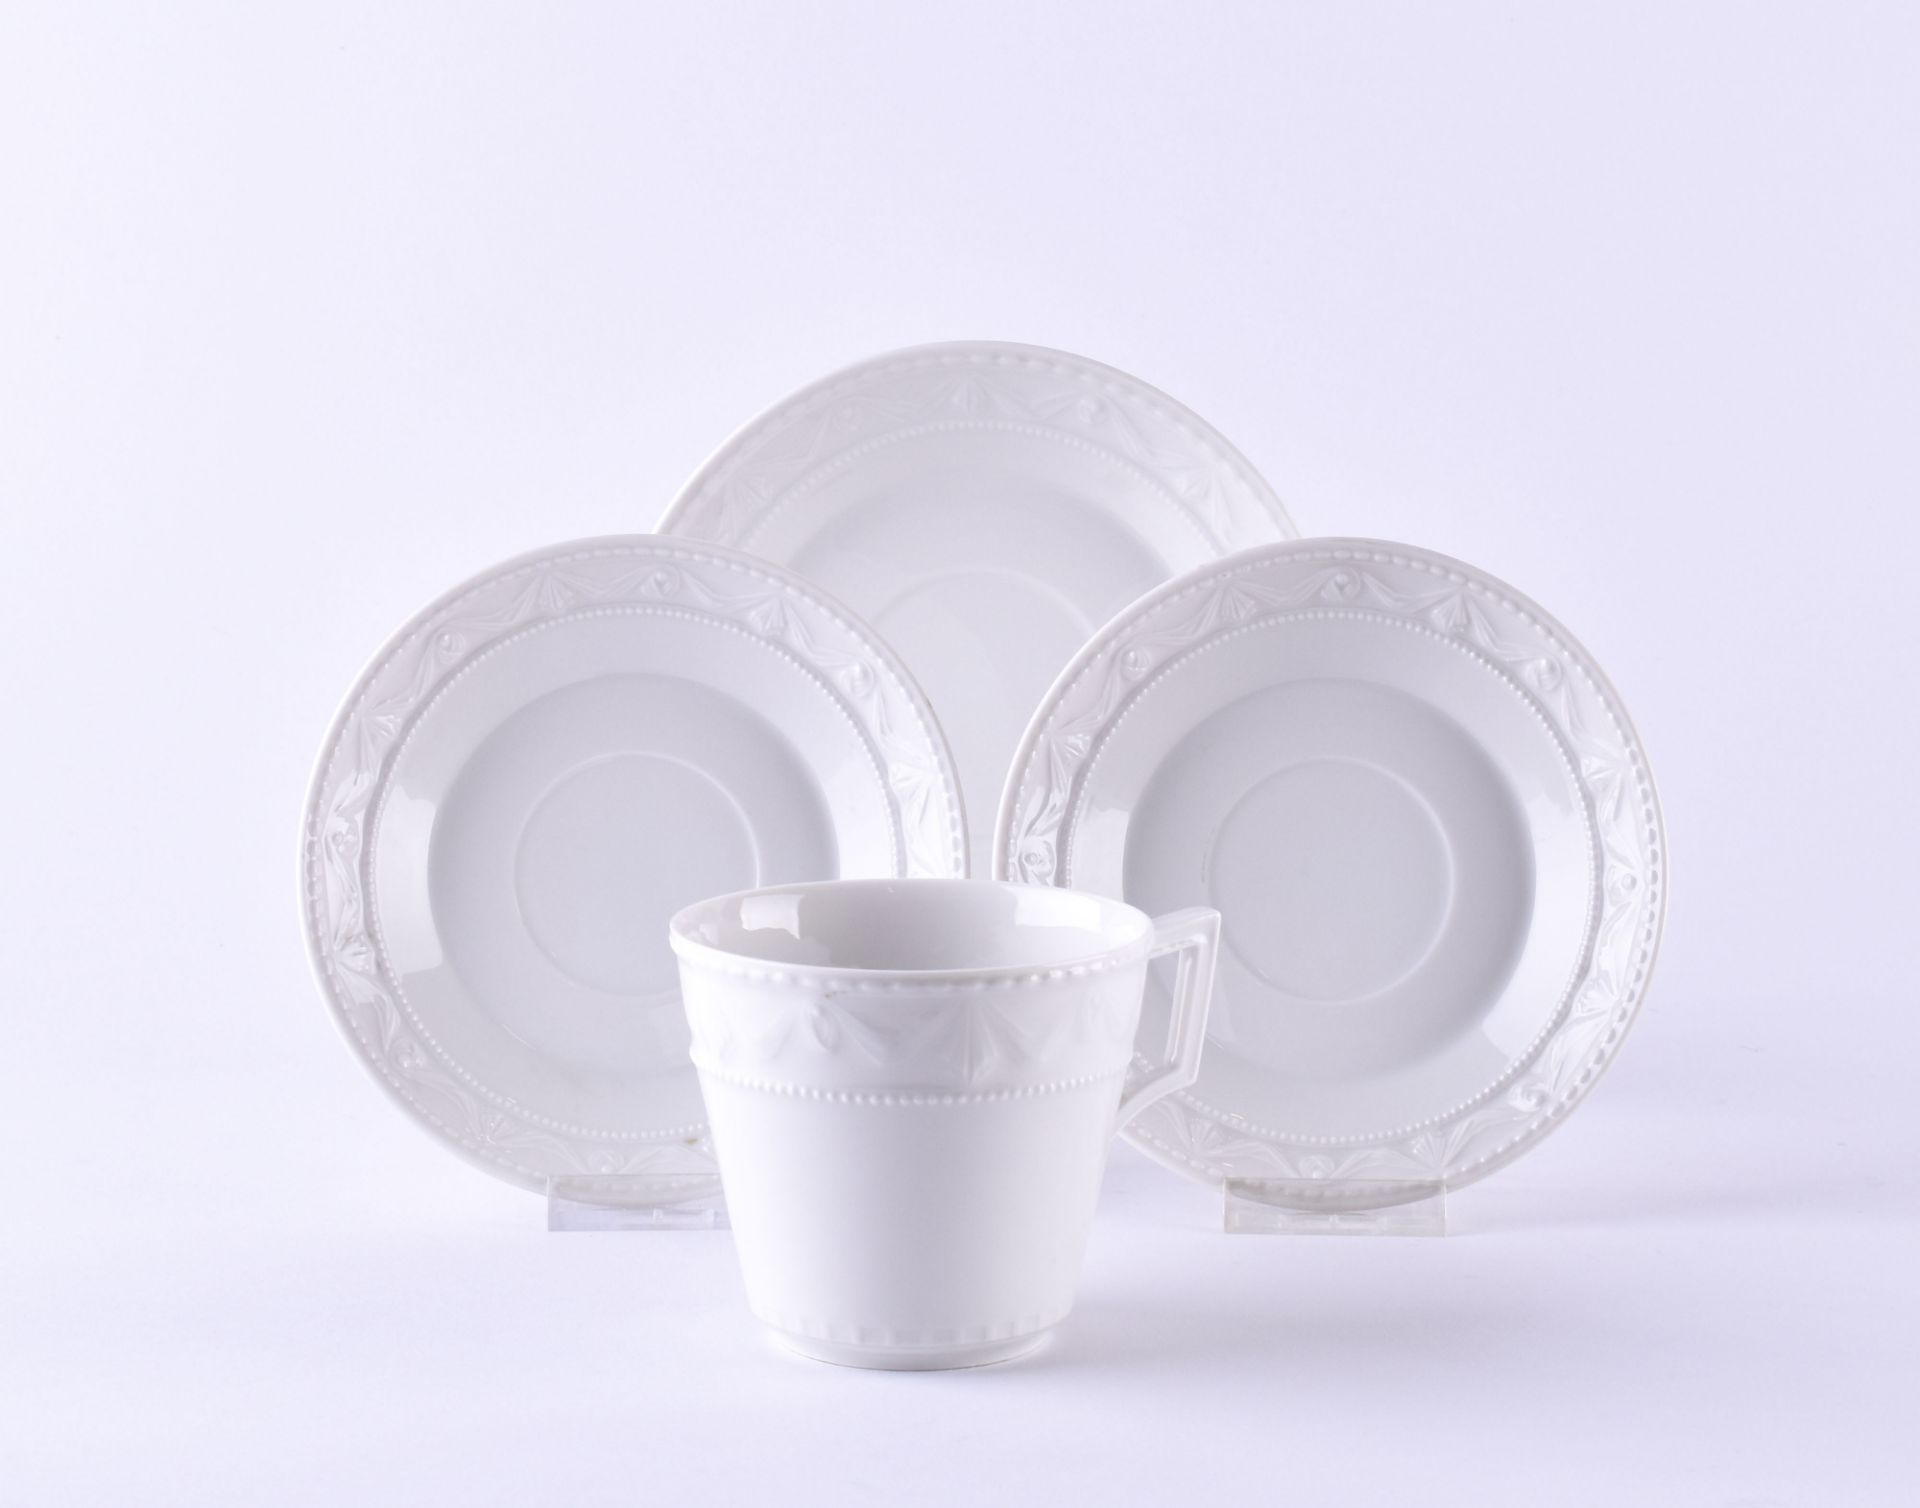 4 pieces, white porcelain, 1 coffee cup ht: 7 cm, unmarked, 2 saucers Ø 12,5 cm, each with 1 grindi